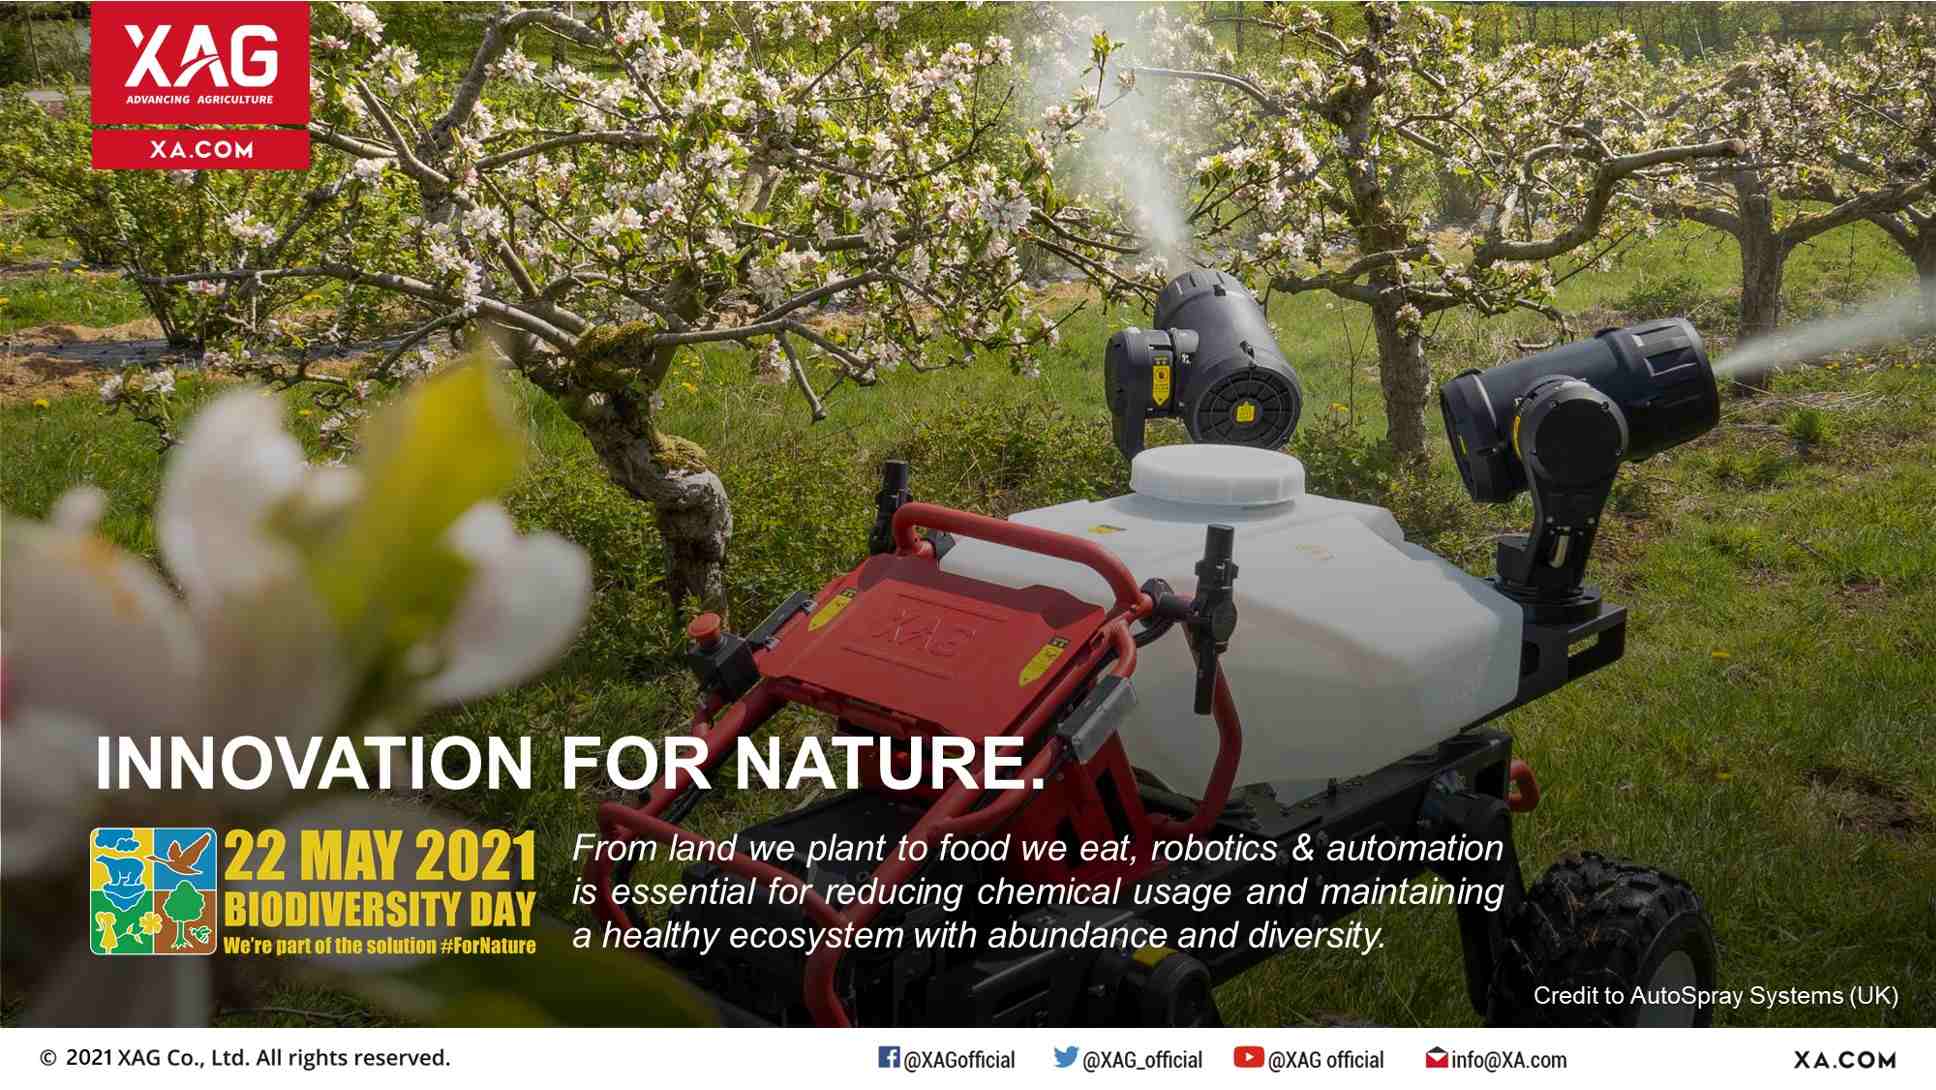 Innovation for Nature